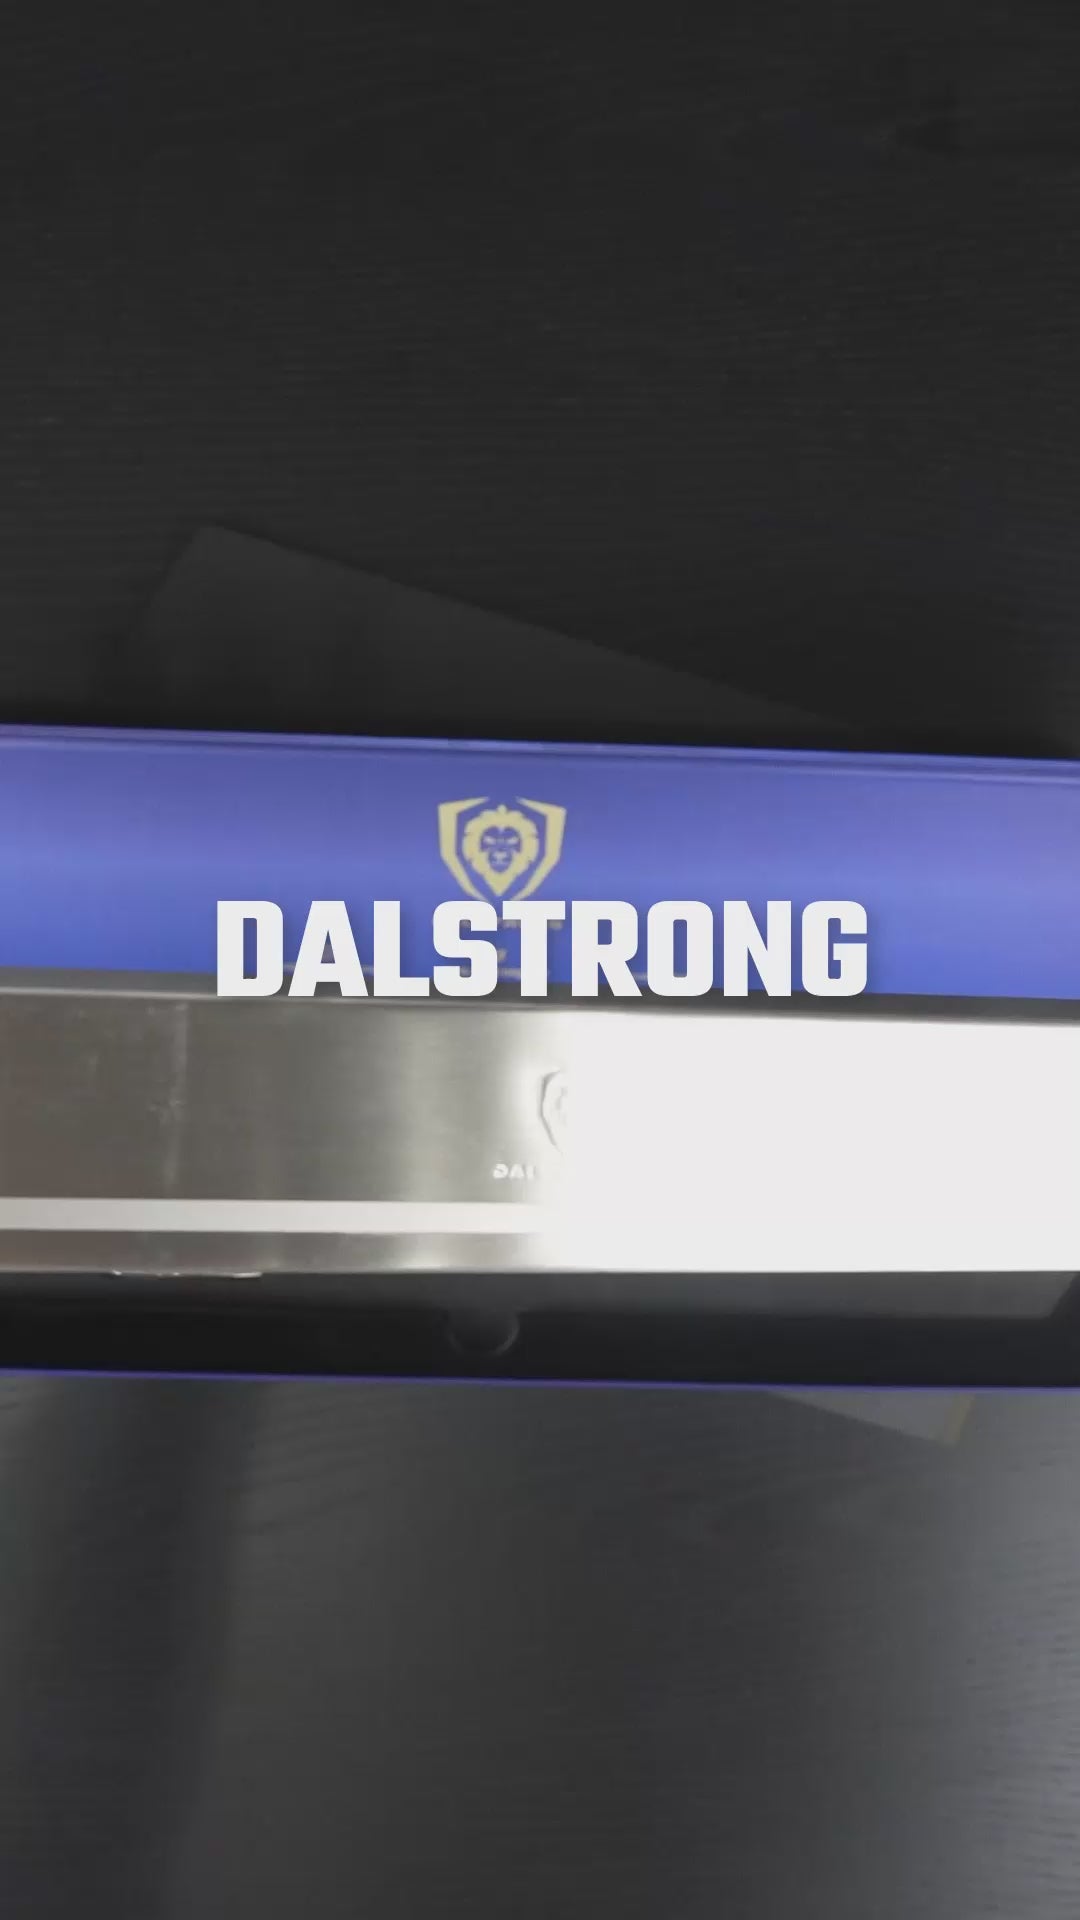 Unboxing the Dalstrong magnetic bar stainless wall knife holder.